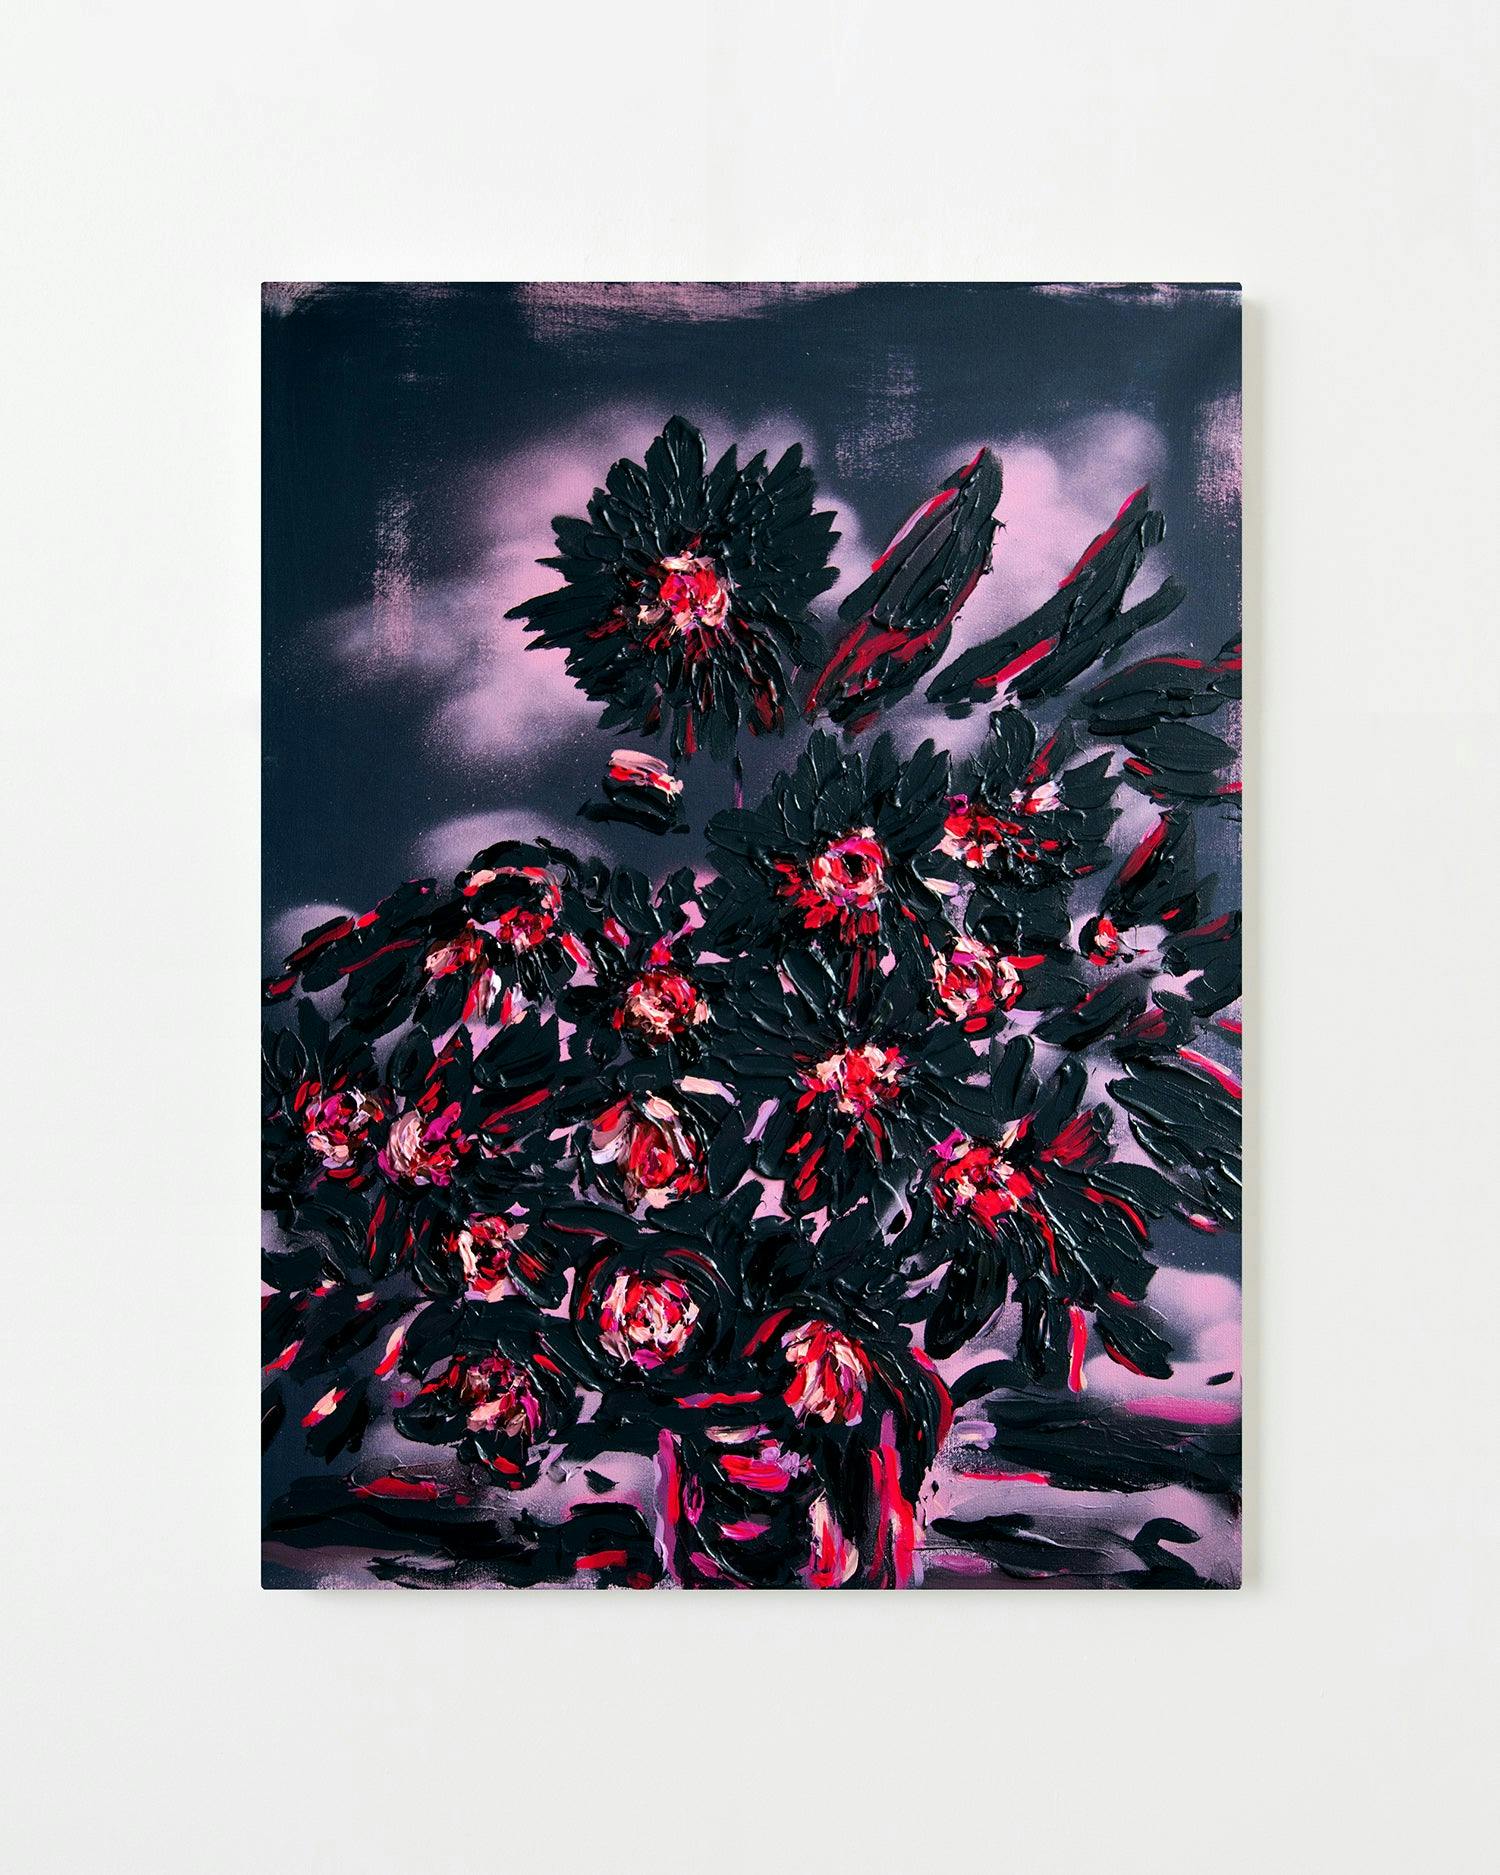 Painting by Erin Lynn Welsh titled "Botany Mono 88".